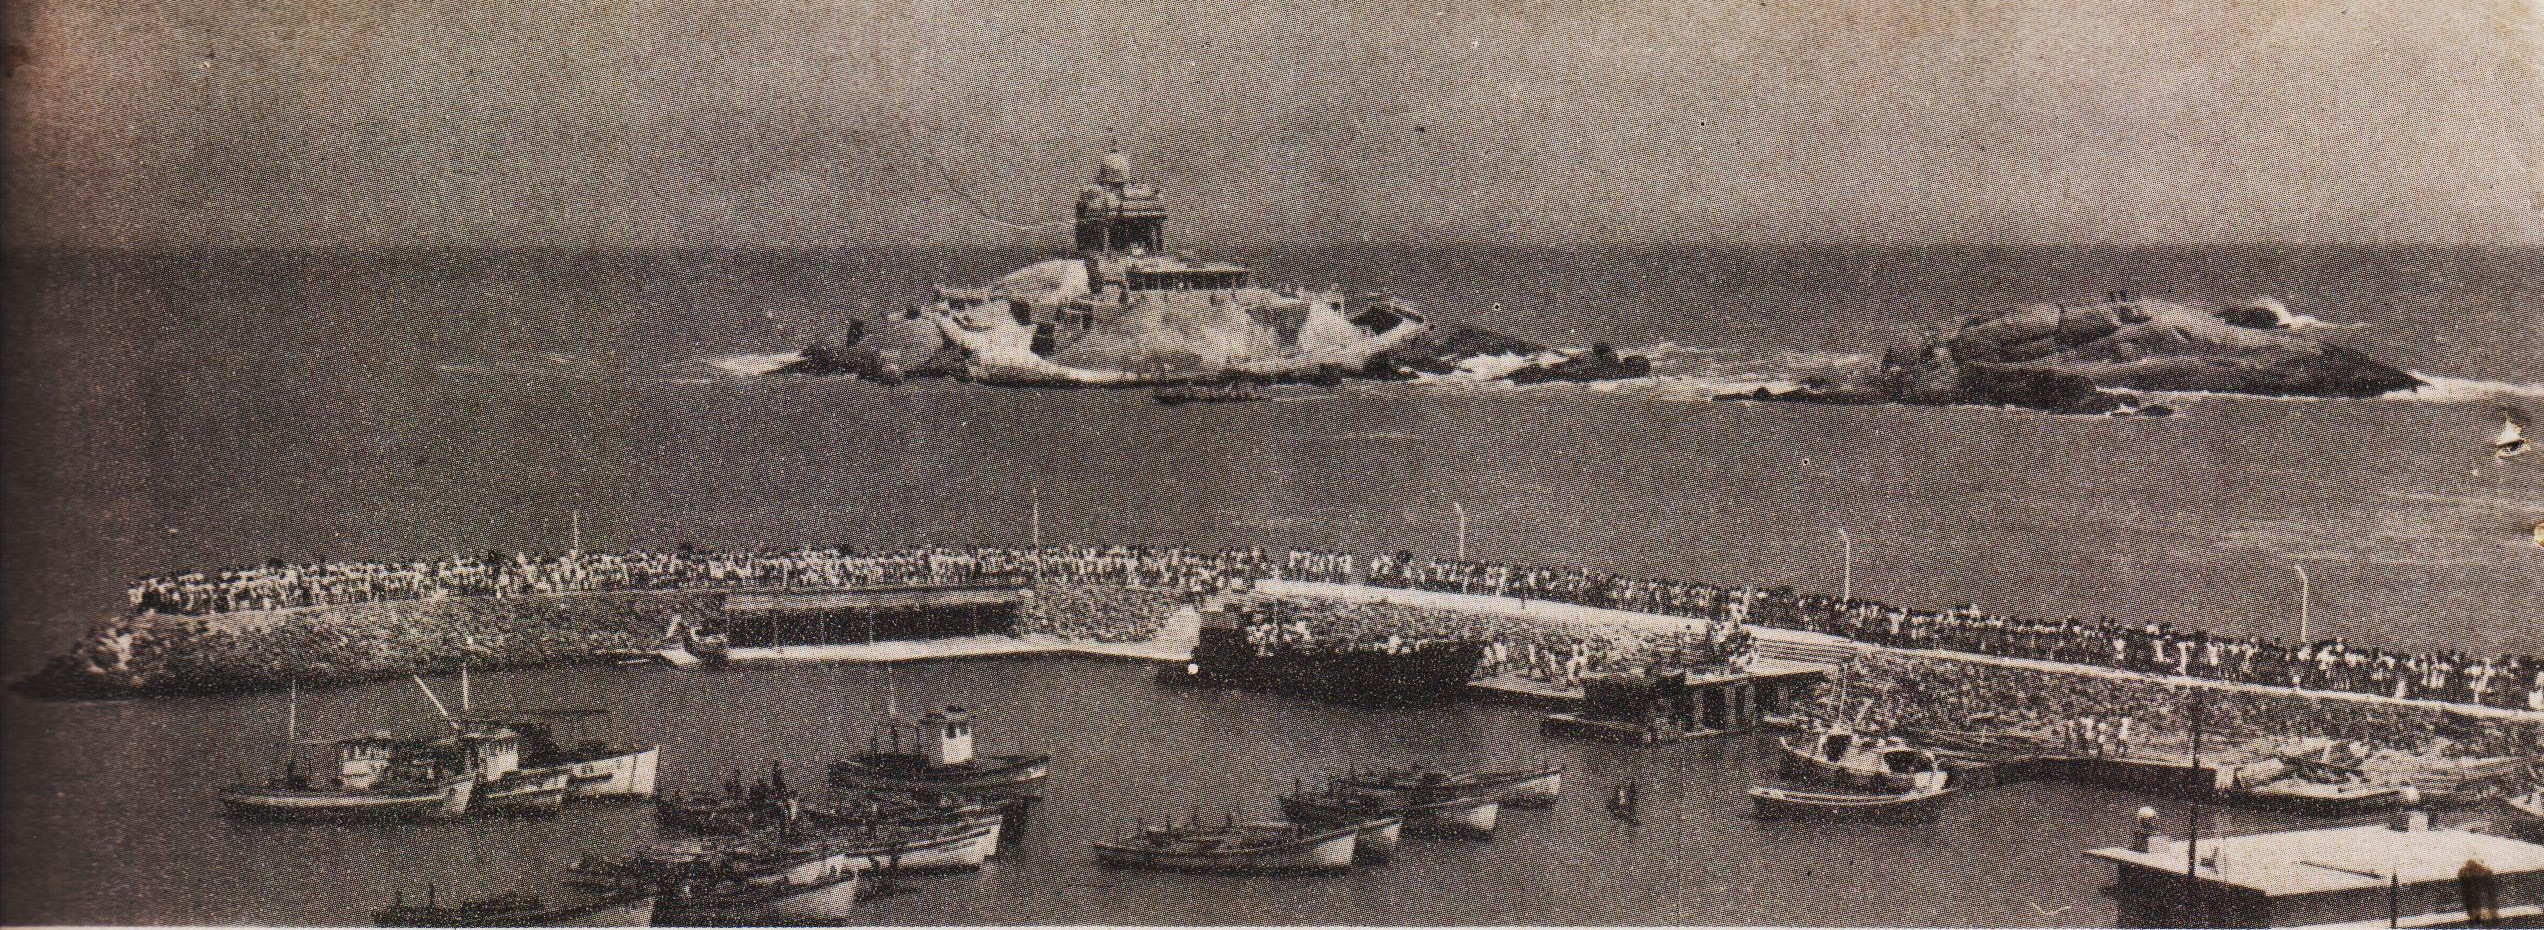 A long line of visitors standing in queue near the jetty-platforms on the Kanyakumari shore, waiting for their chance to board boats to ferry them to the Vivekananda Rock.